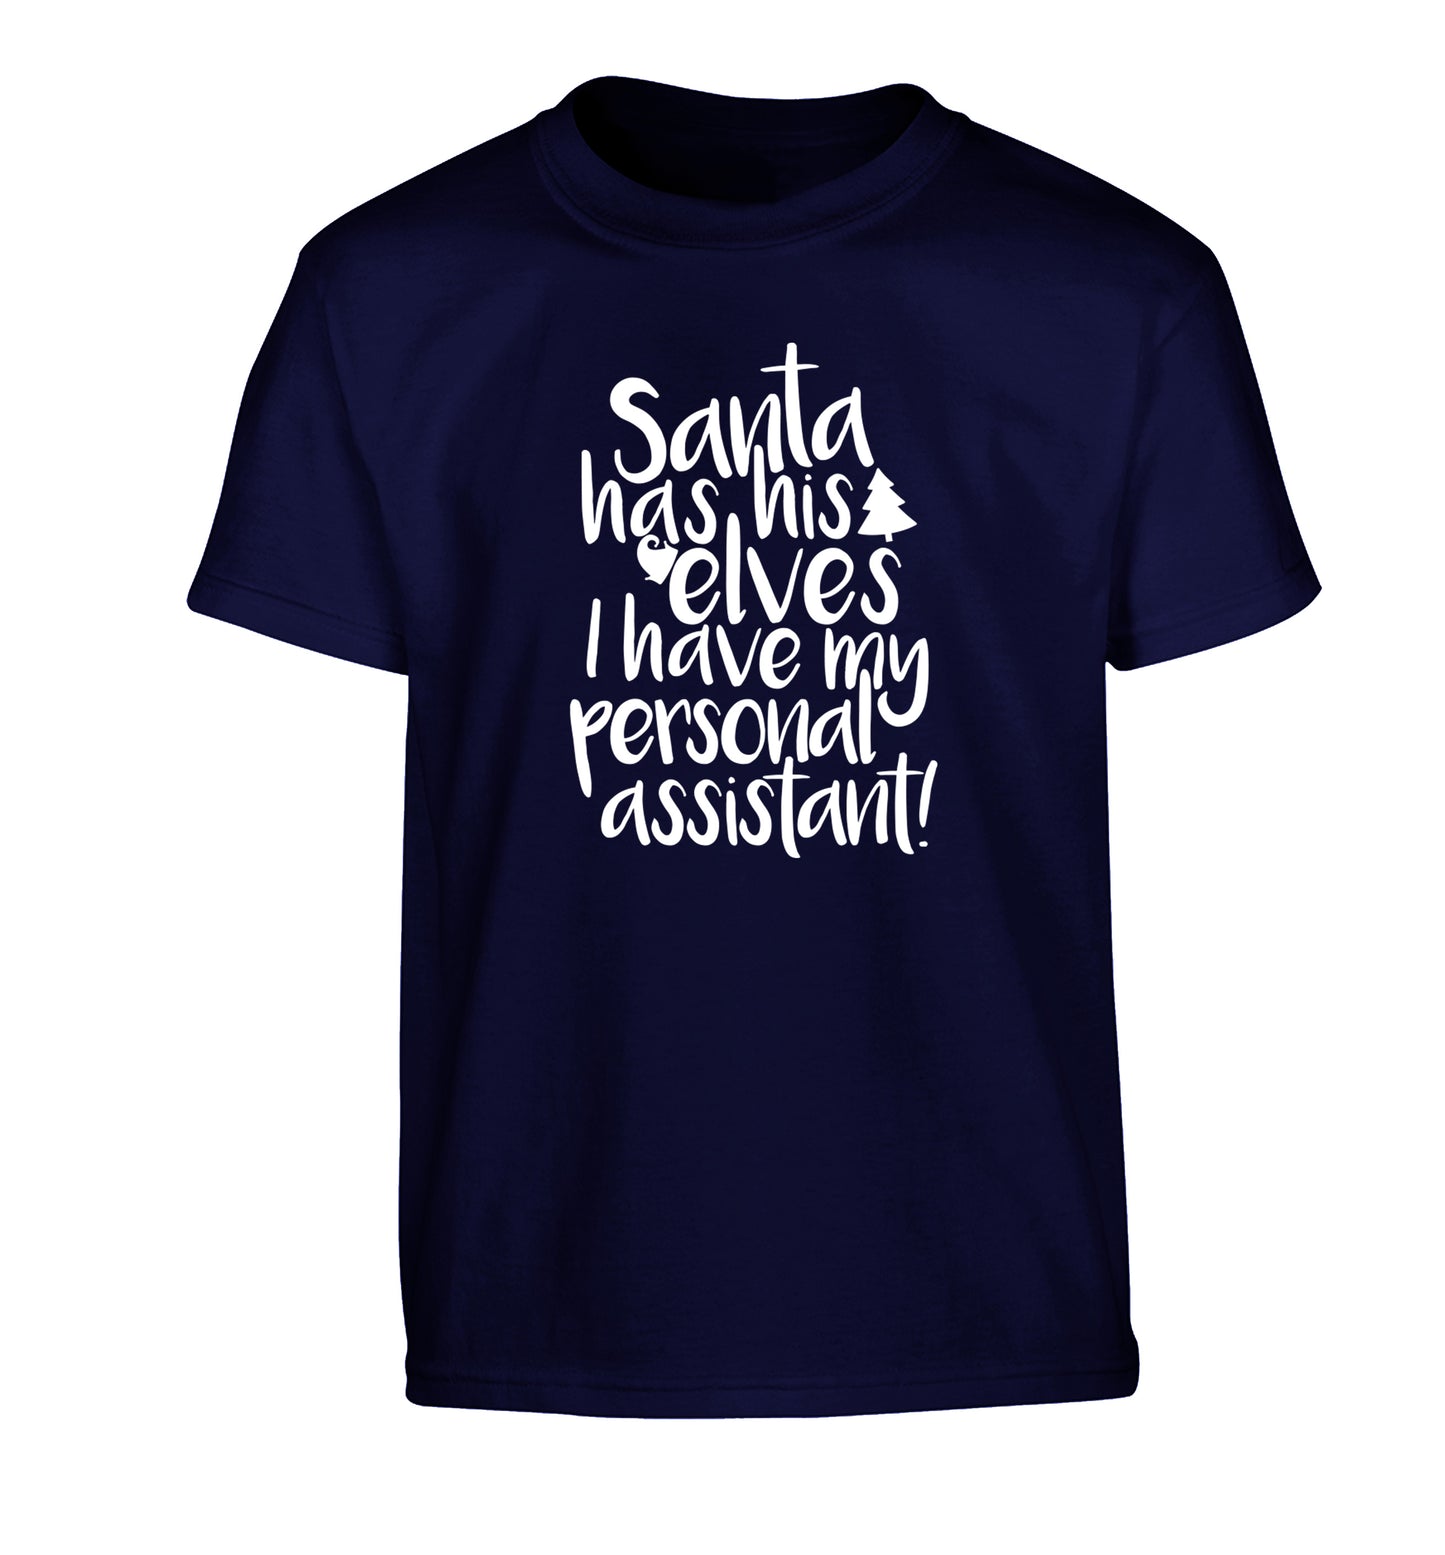 Santa has his elves I have my personal assistant Children's navy Tshirt 12-14 Years